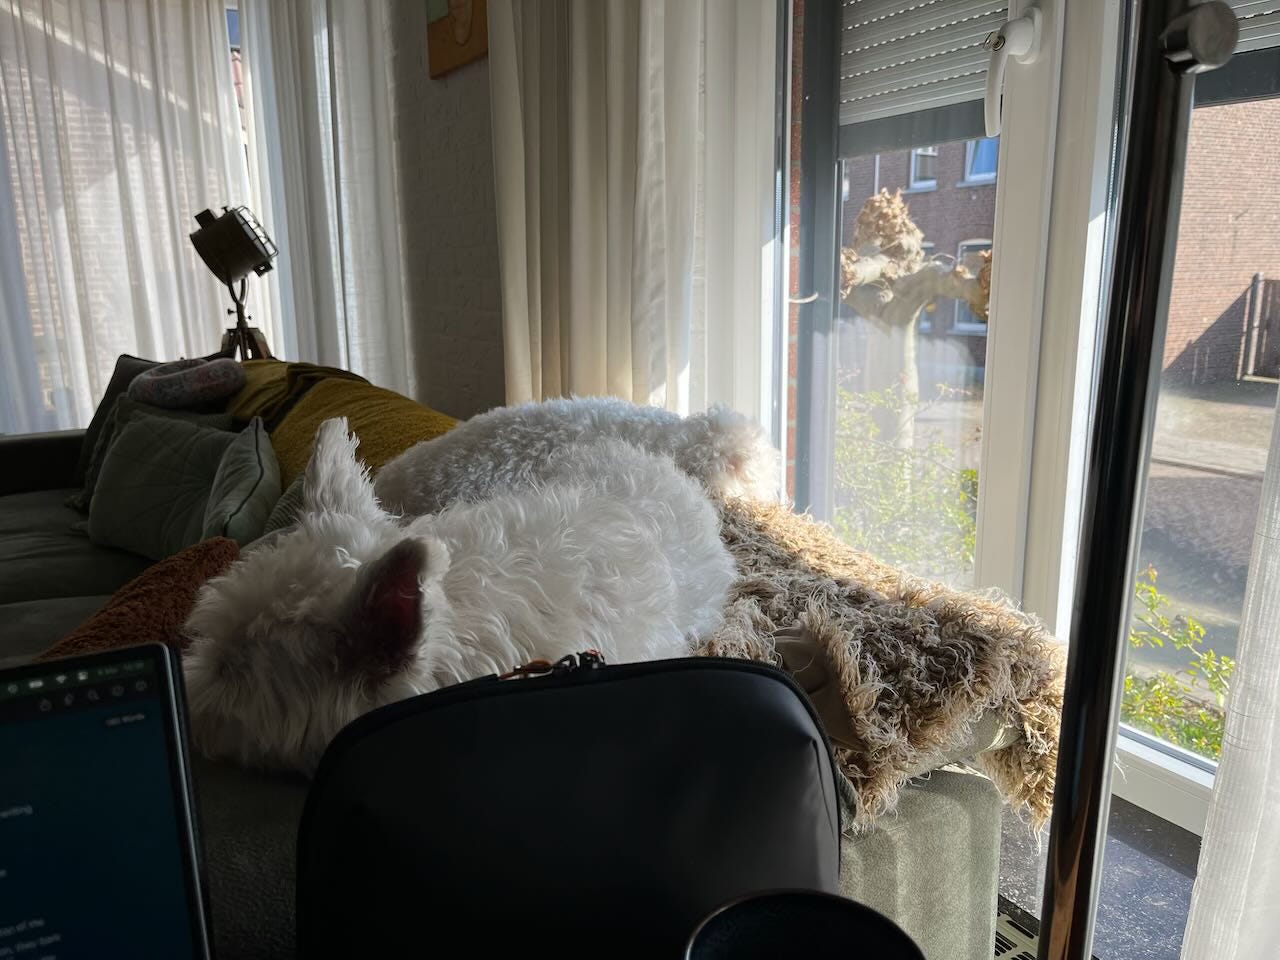 This is a photo taken from an indoor perspective of fluffy white dogs lying comfortably on a shaggy throw blanket placed on top of a grey sofa. The dogs are enjoying naps, bathed in sunlight filtering through sheer white curtains.